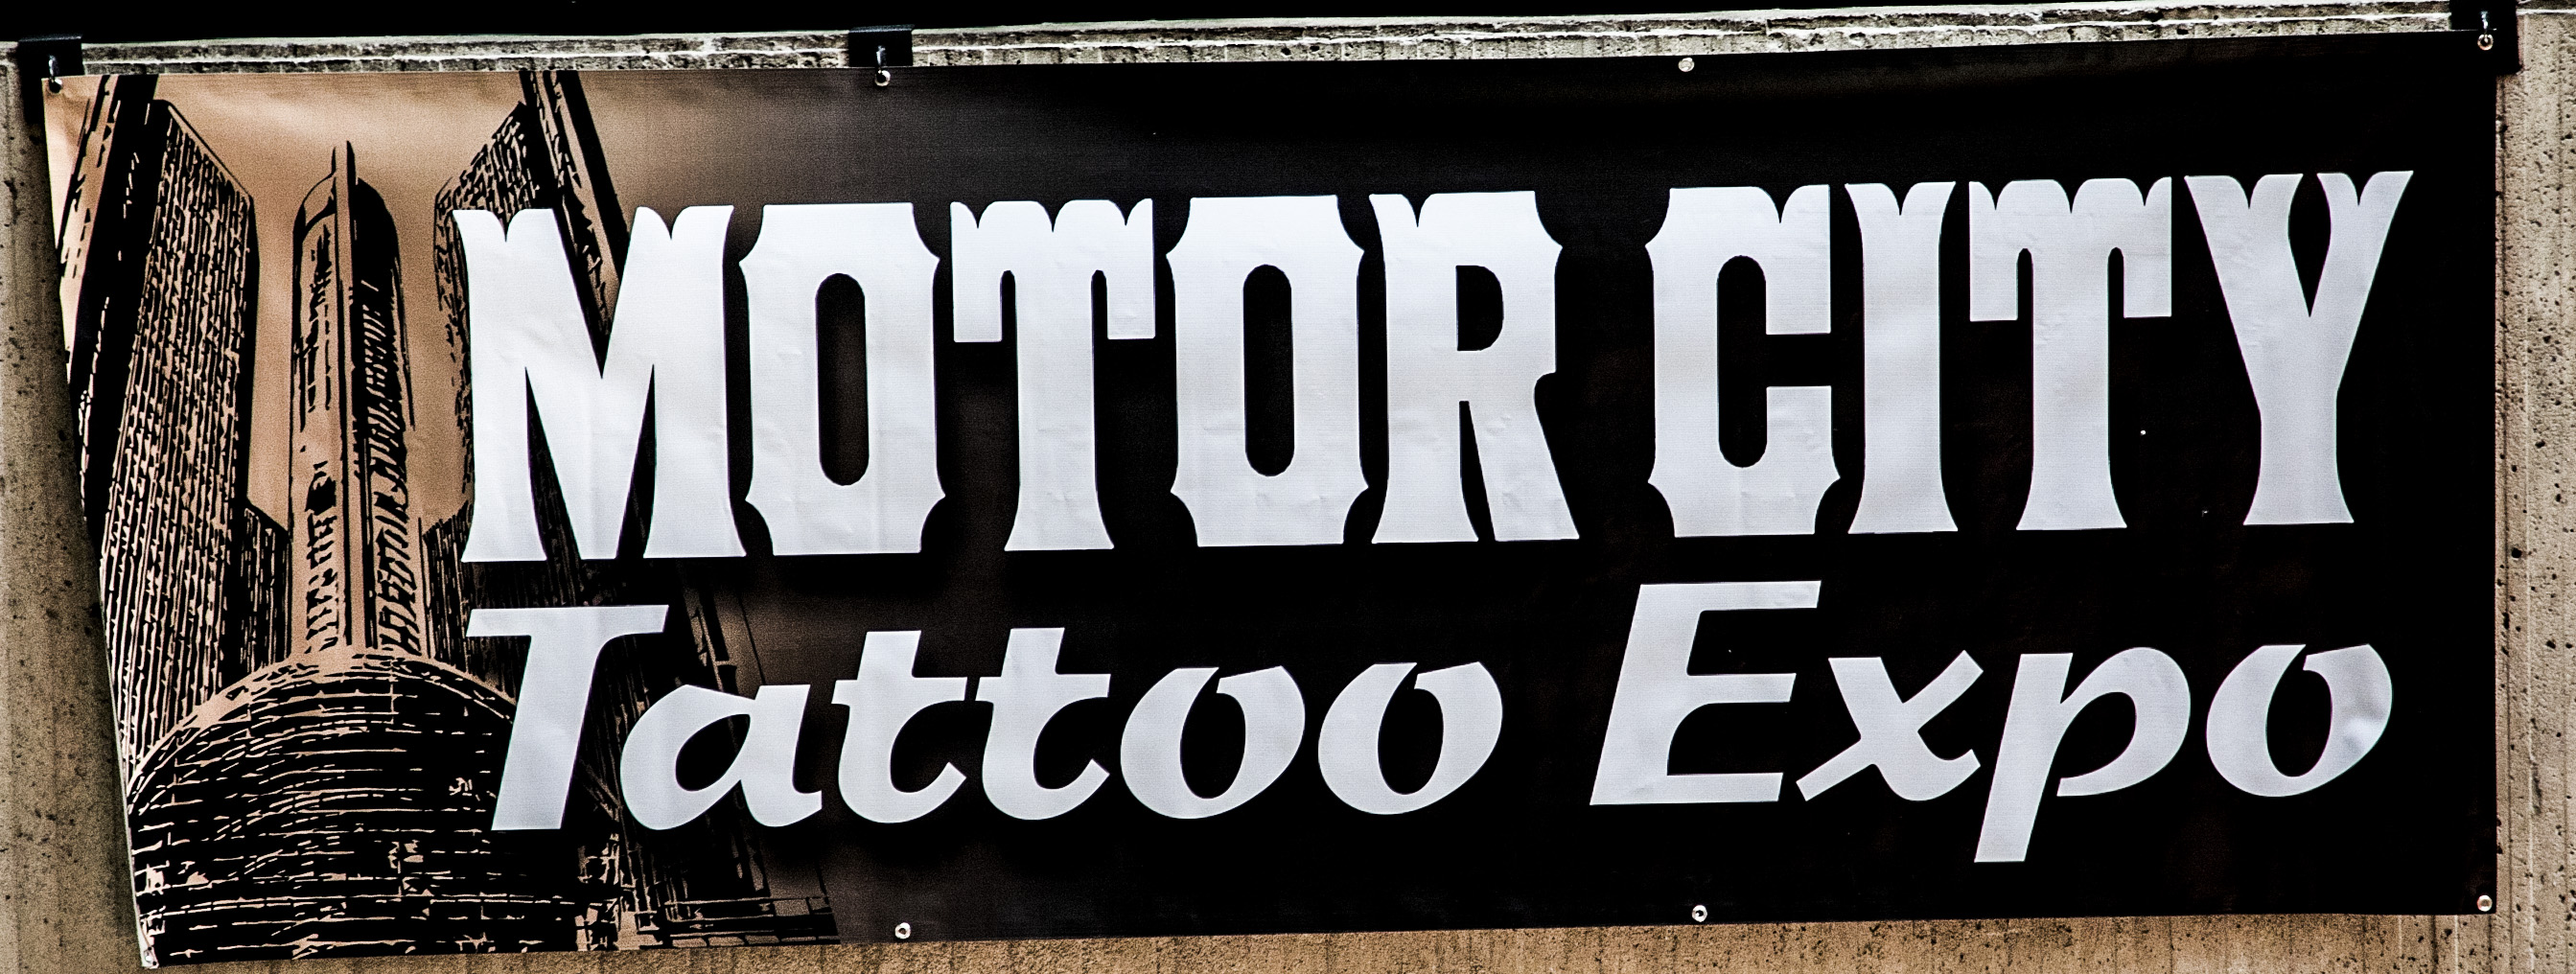 Photo of the Motor City Tattoo Expo banner